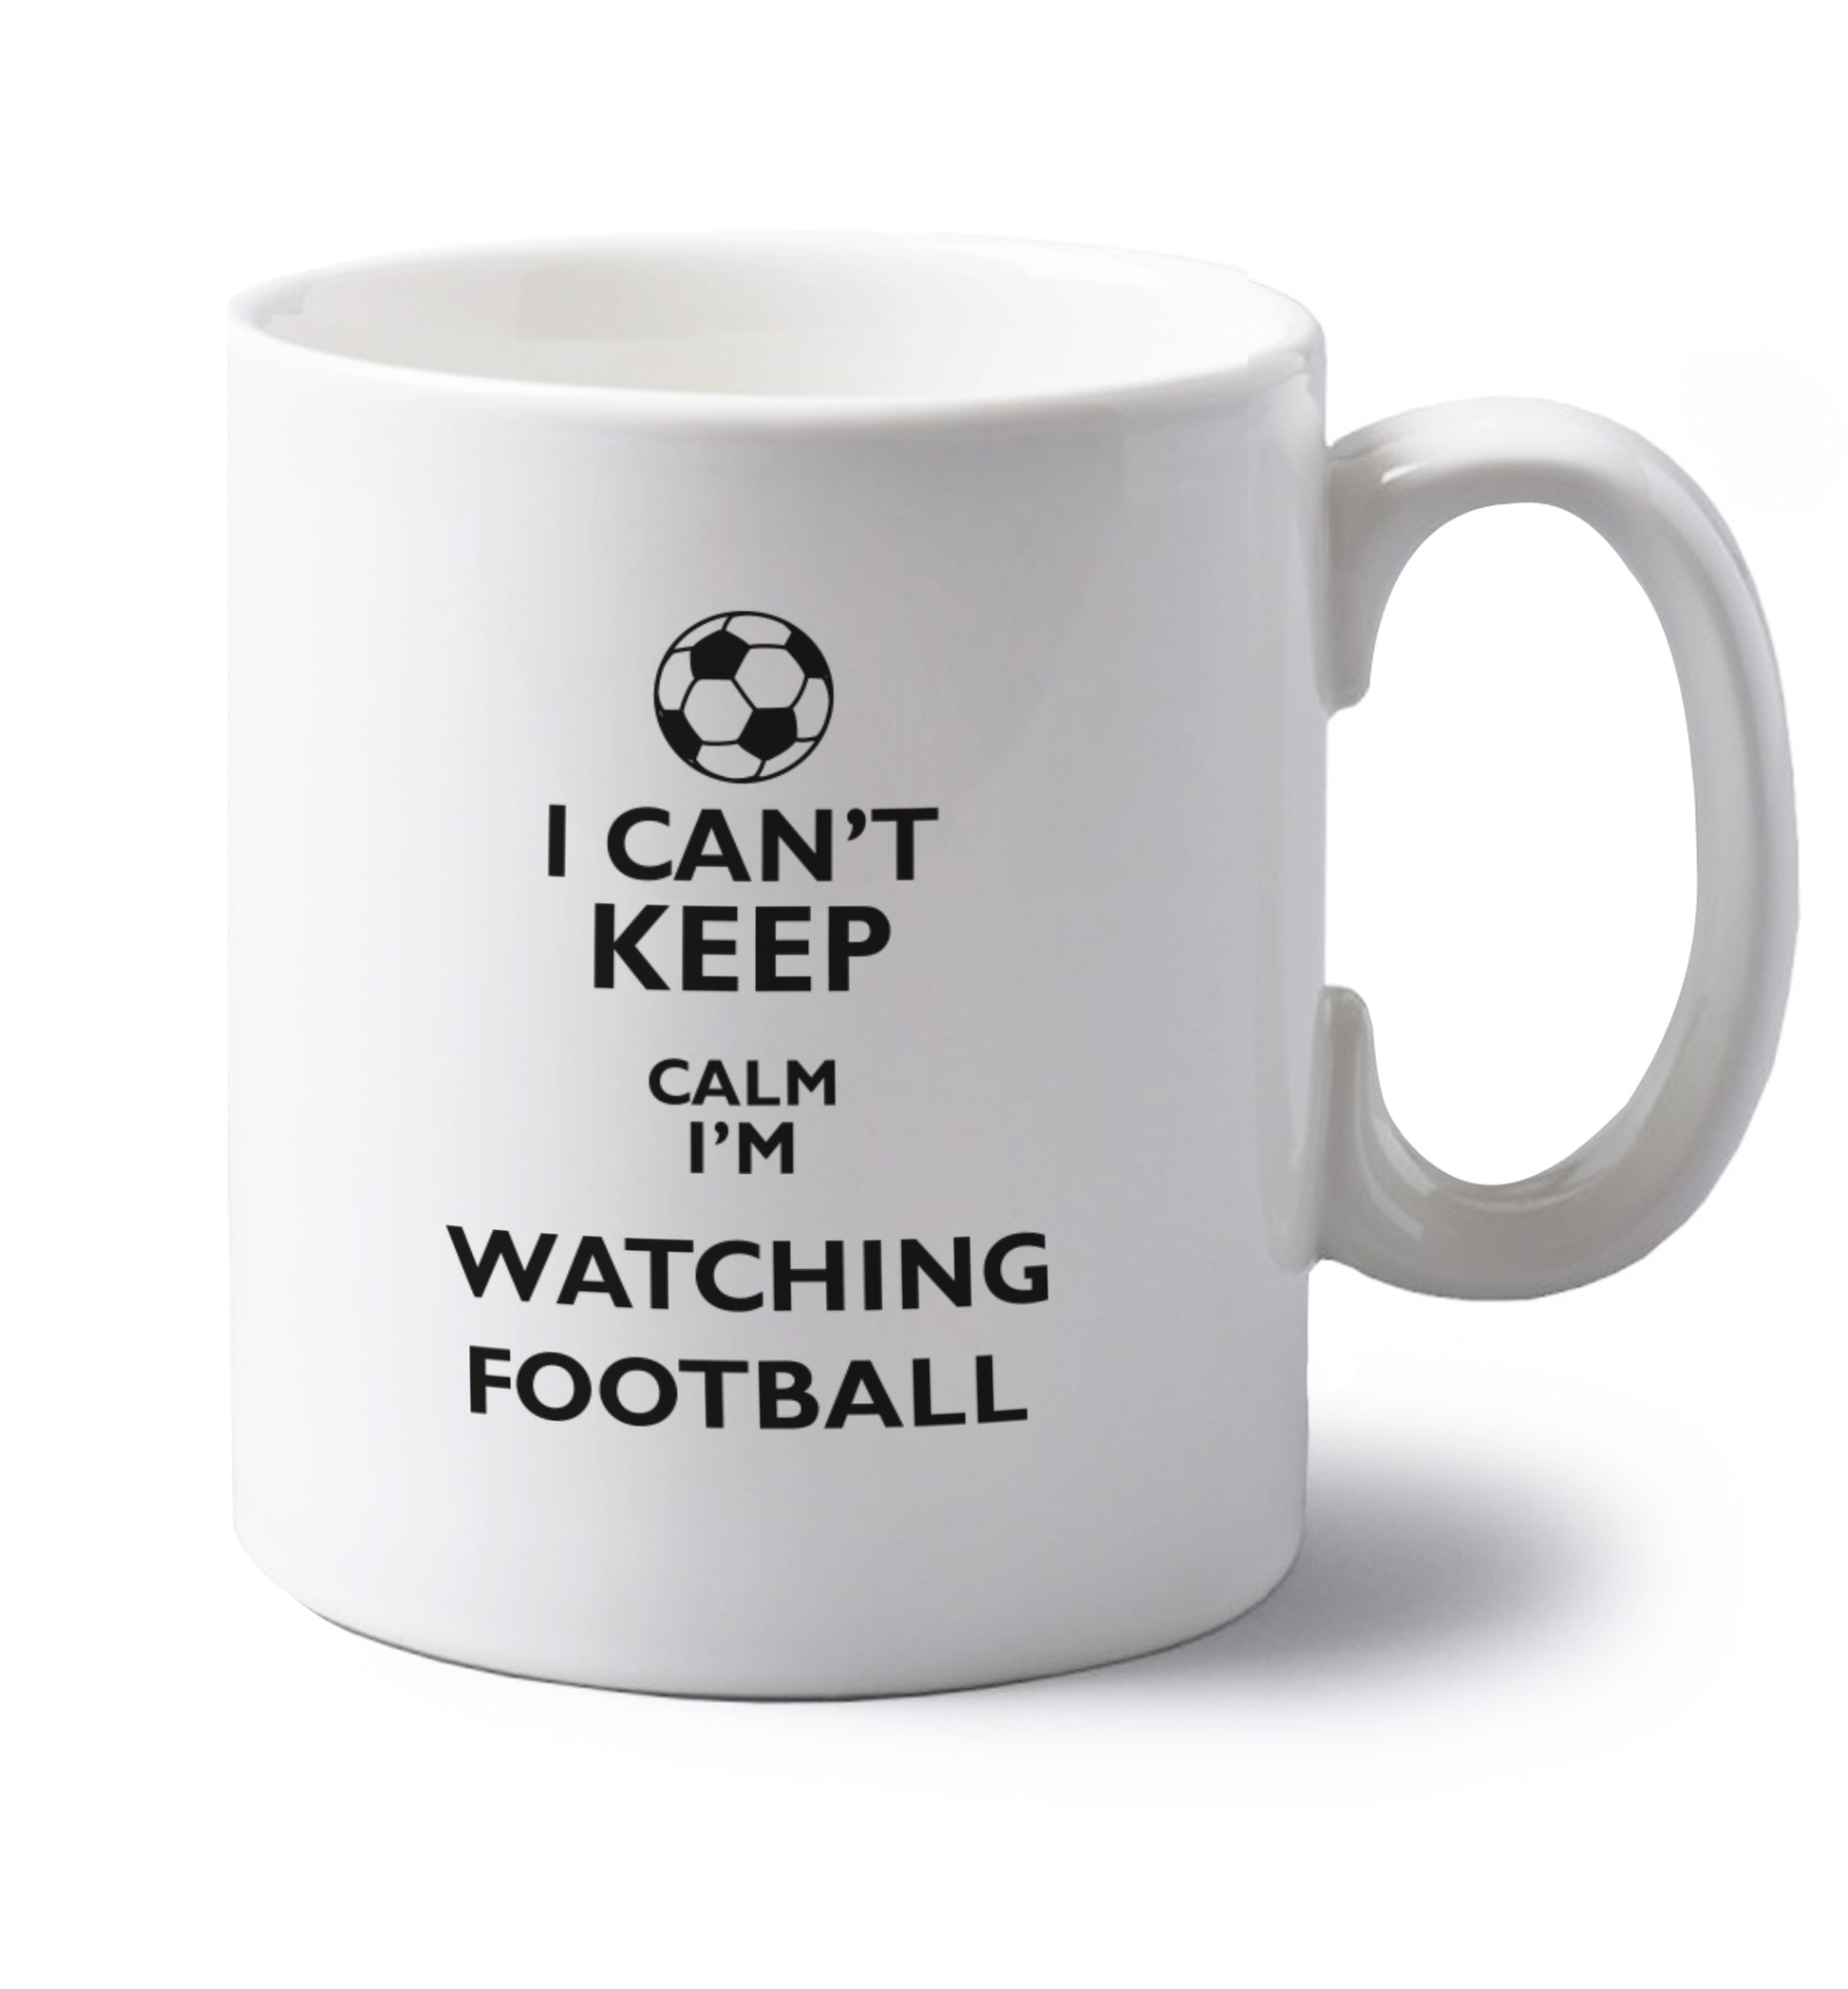 I can't keep calm I'm watching the football left handed white ceramic mug 